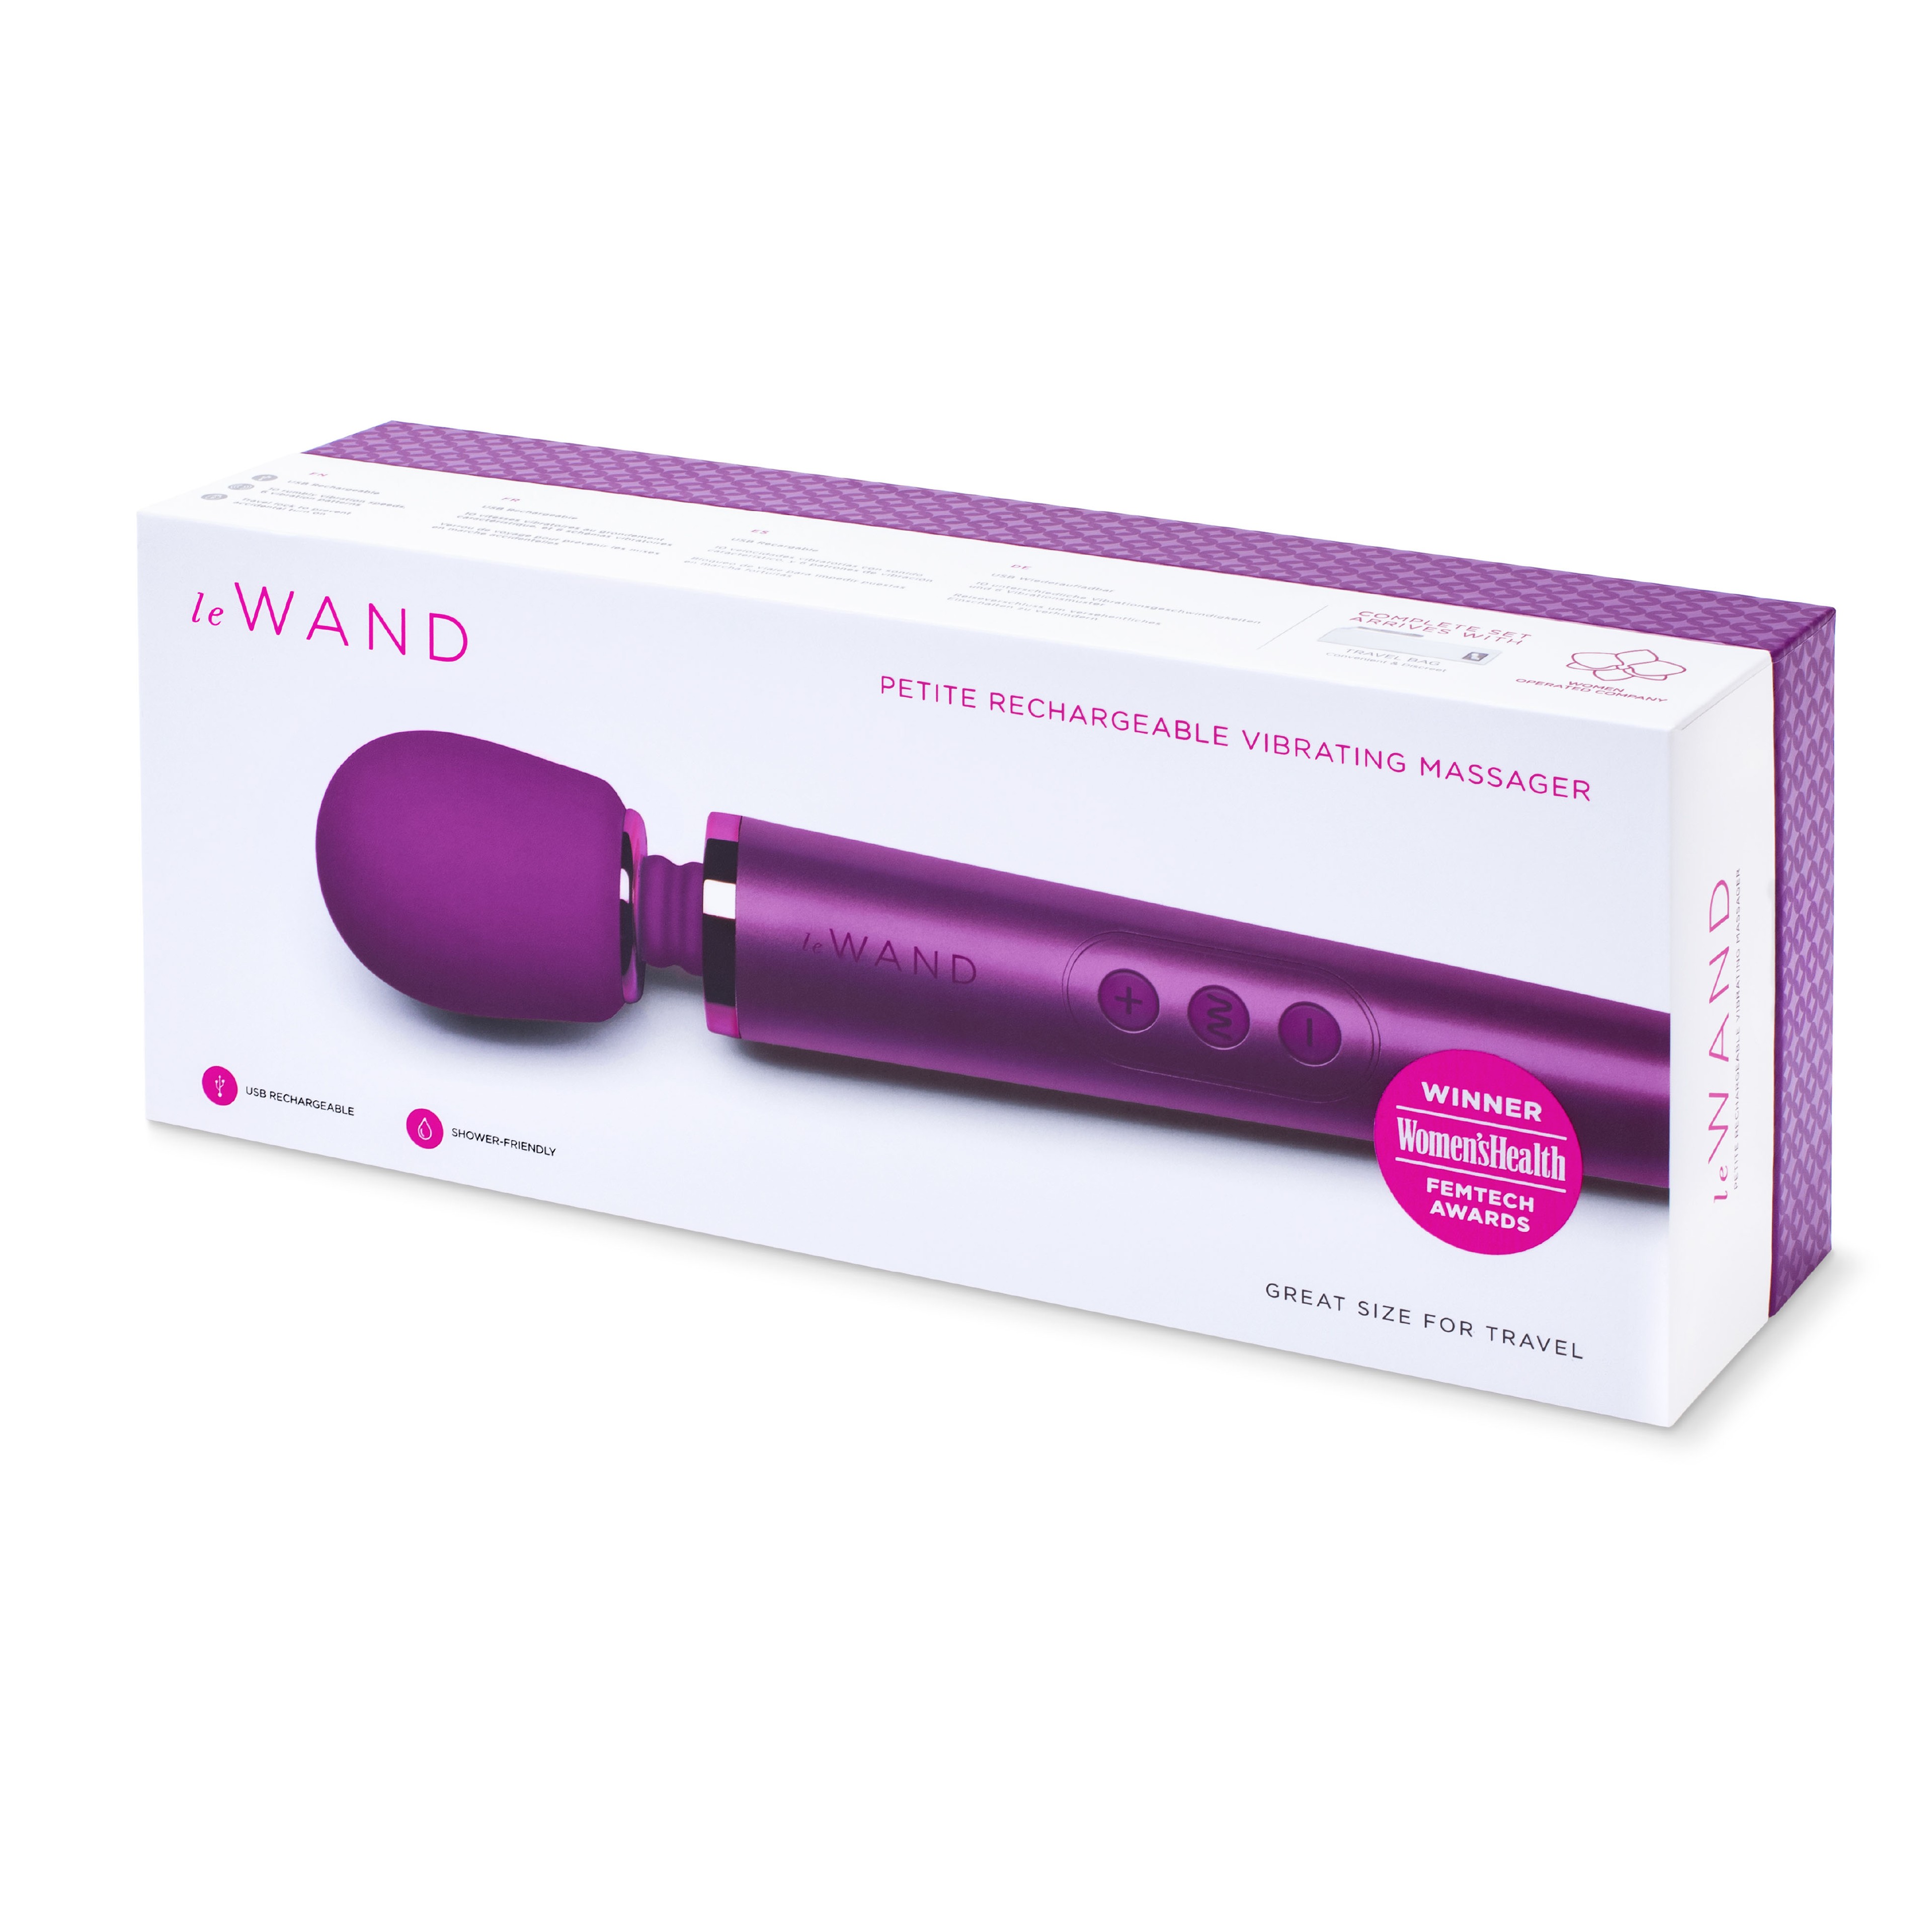 Le Wand Petite Rechargeable Vibrating Massager Cherry